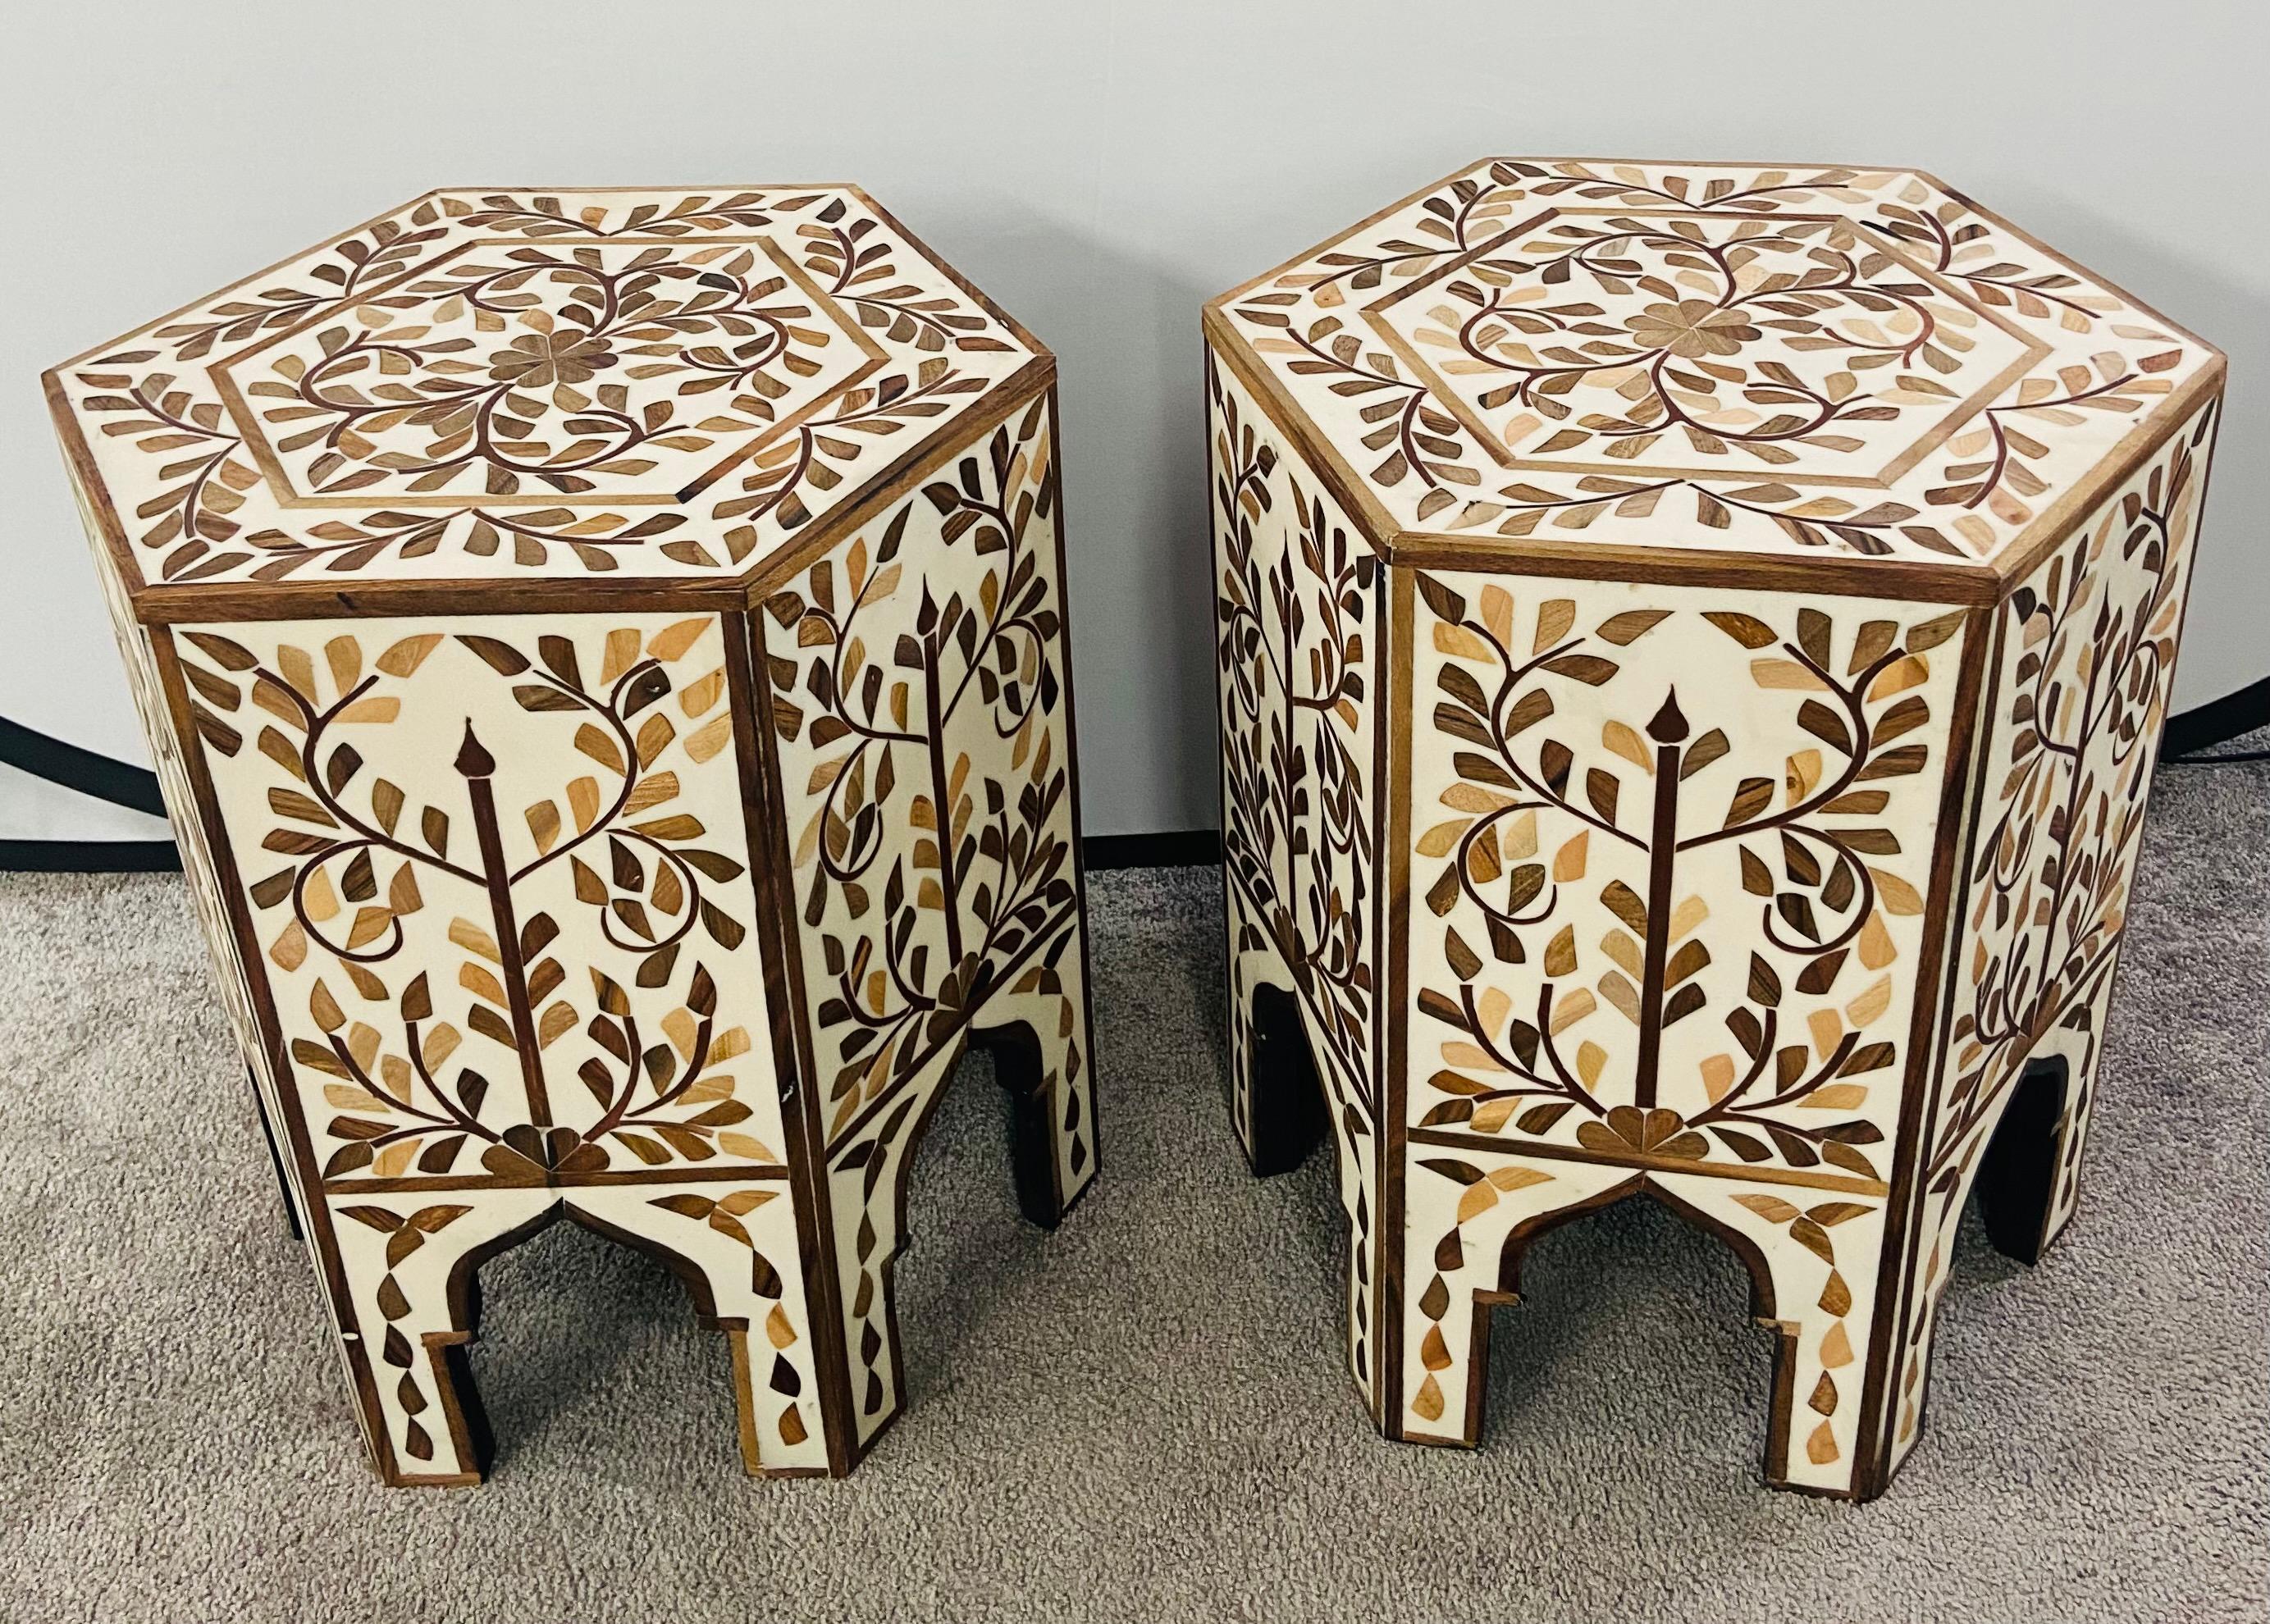 An exquisite pair of Moroccan side or end table featuring an hexagonal shape. The handmade tables are finely decorated in leaves Pattern and beautiful arches, a staple of the moorish timeless architecture and design. Hand made of resin in an off